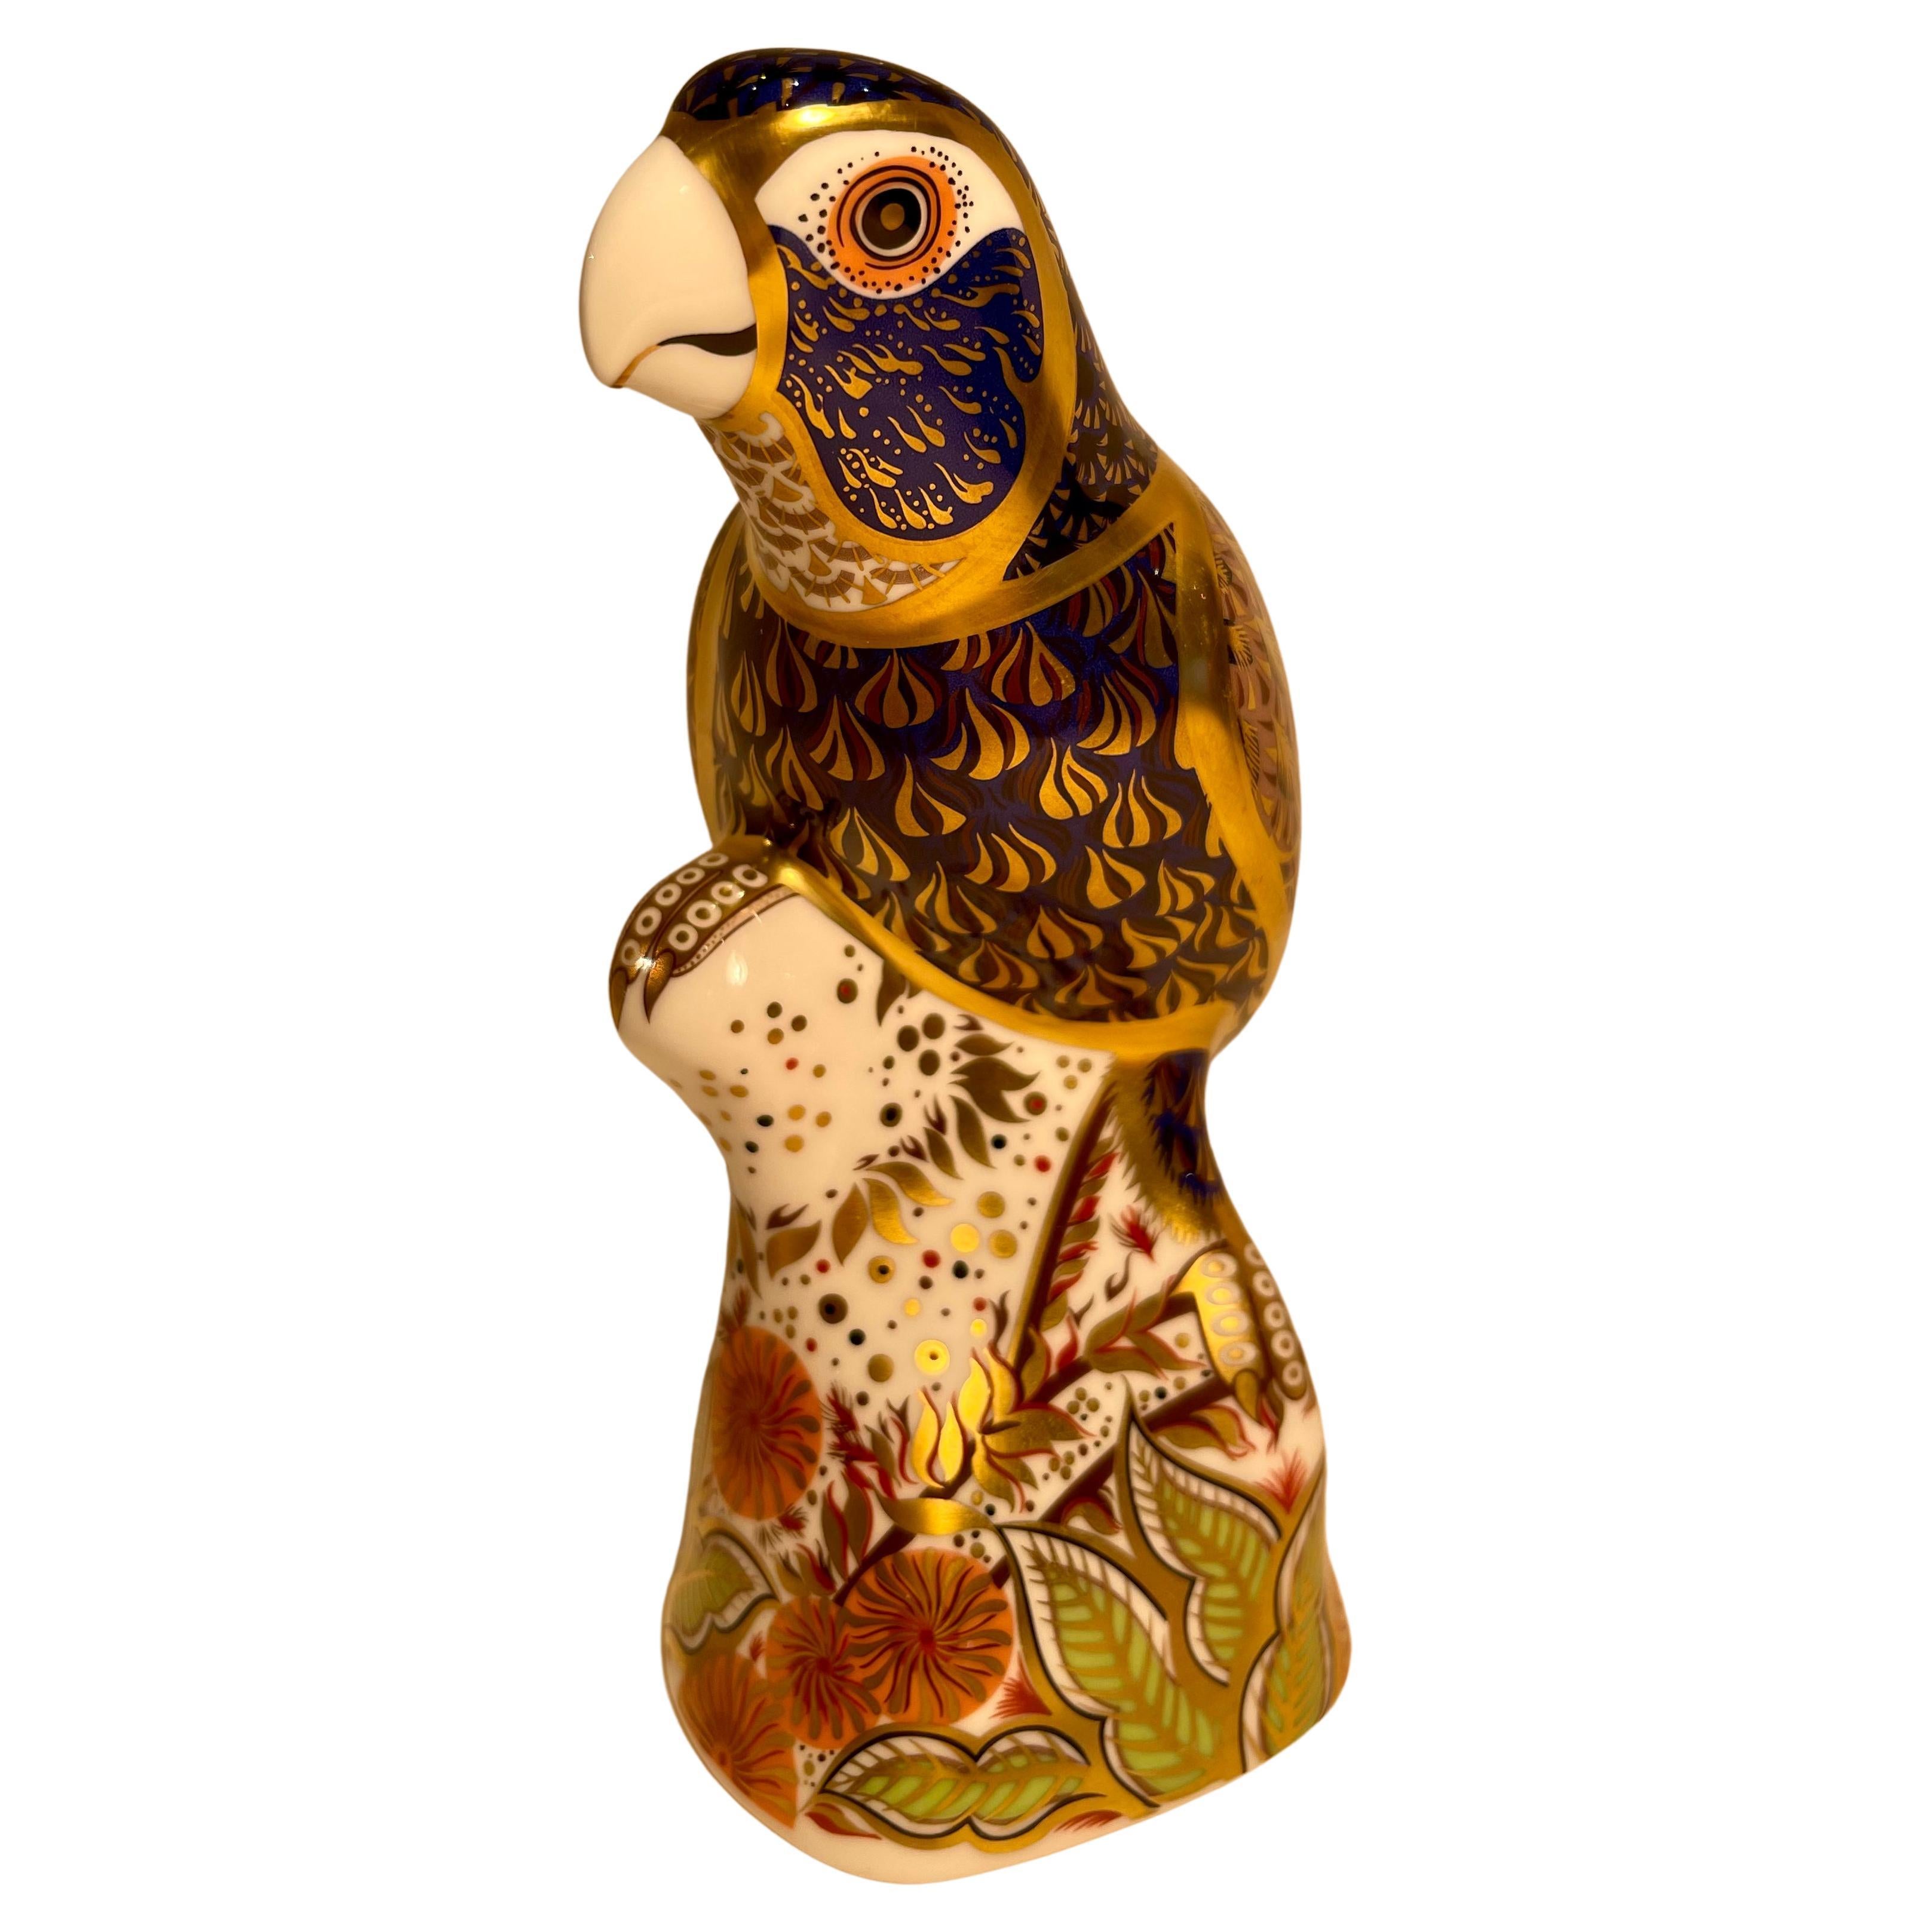 Very collectible, hand-made and hand-painted in England, retired Royal Crown Derby fine bone china parrot figurine or paperweight. This is a larger size piece measuring approximately 6.25